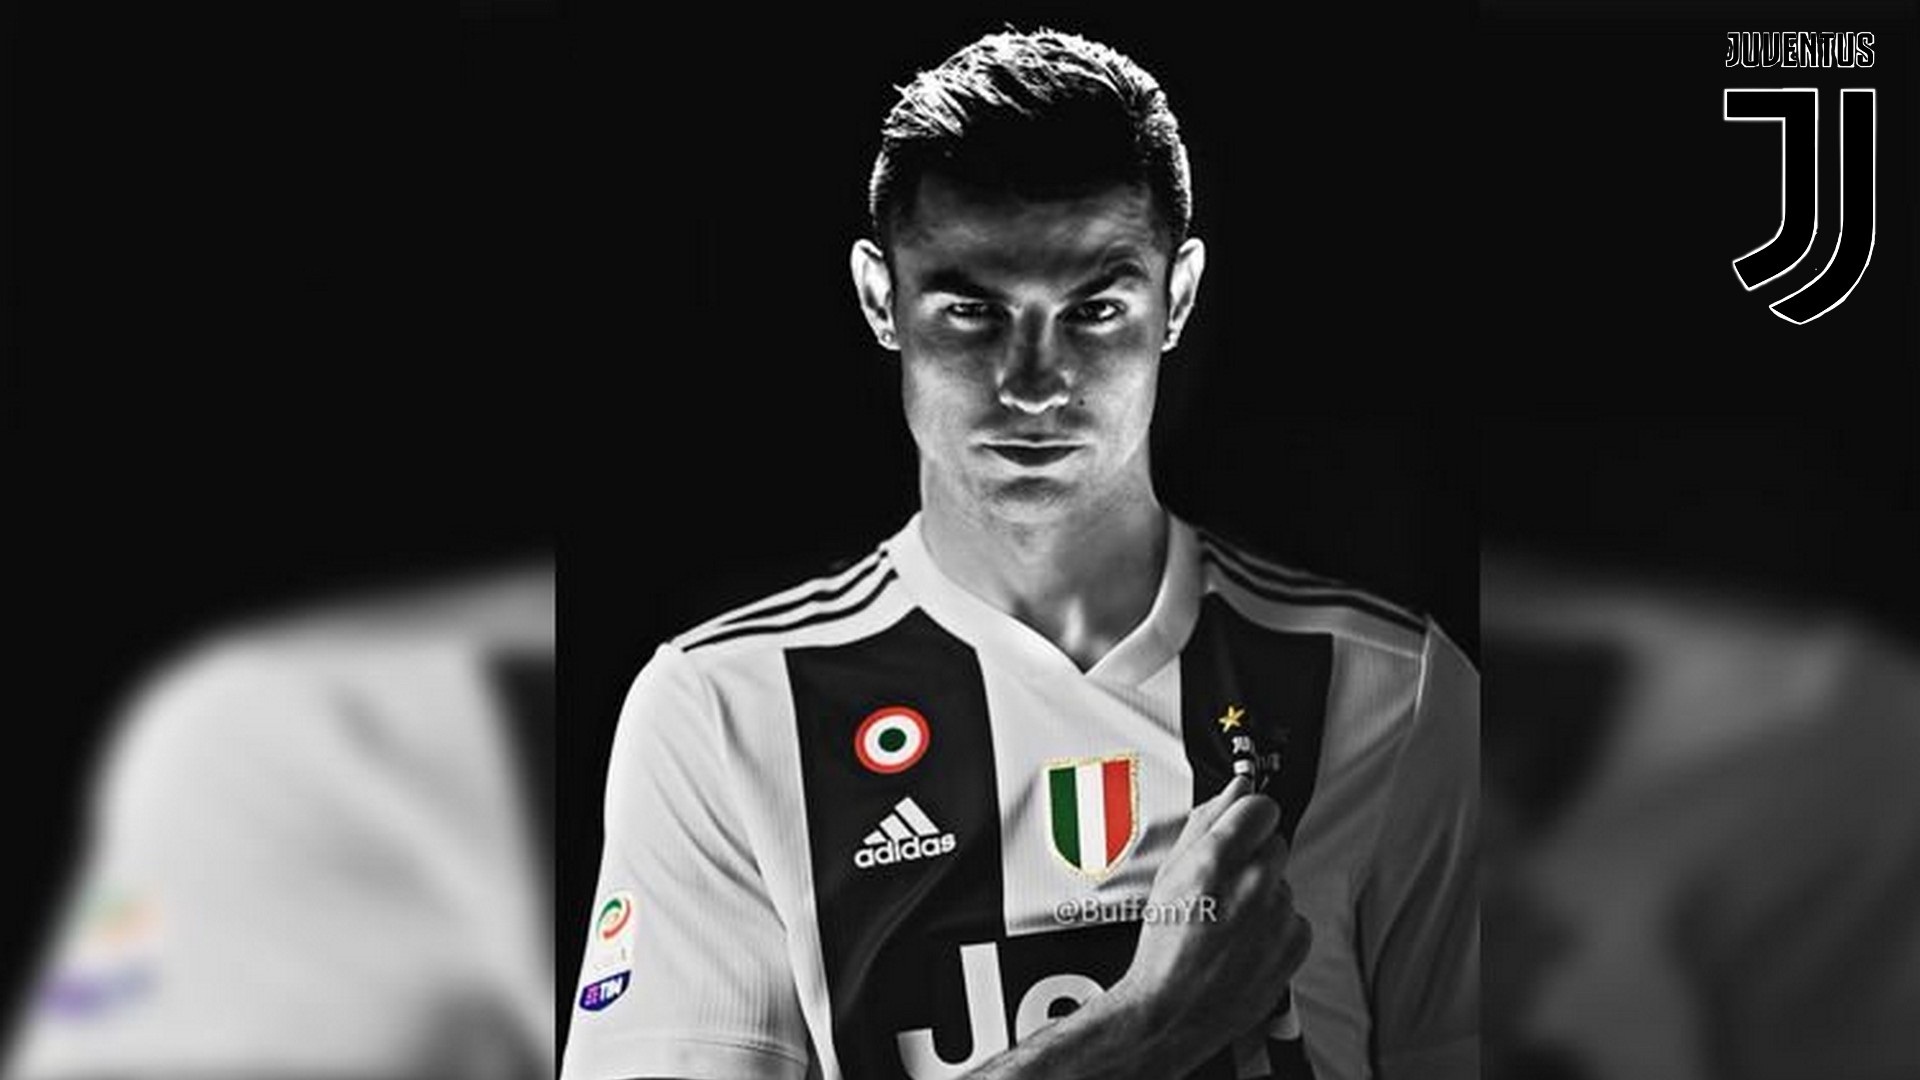 Wallpaper Desktop Christiano Ronaldo Juventus HD with resolution 1920x1080 pixel. You can make this wallpaper for your Mac or Windows Desktop Background, iPhone, Android or Tablet and another Smartphone device